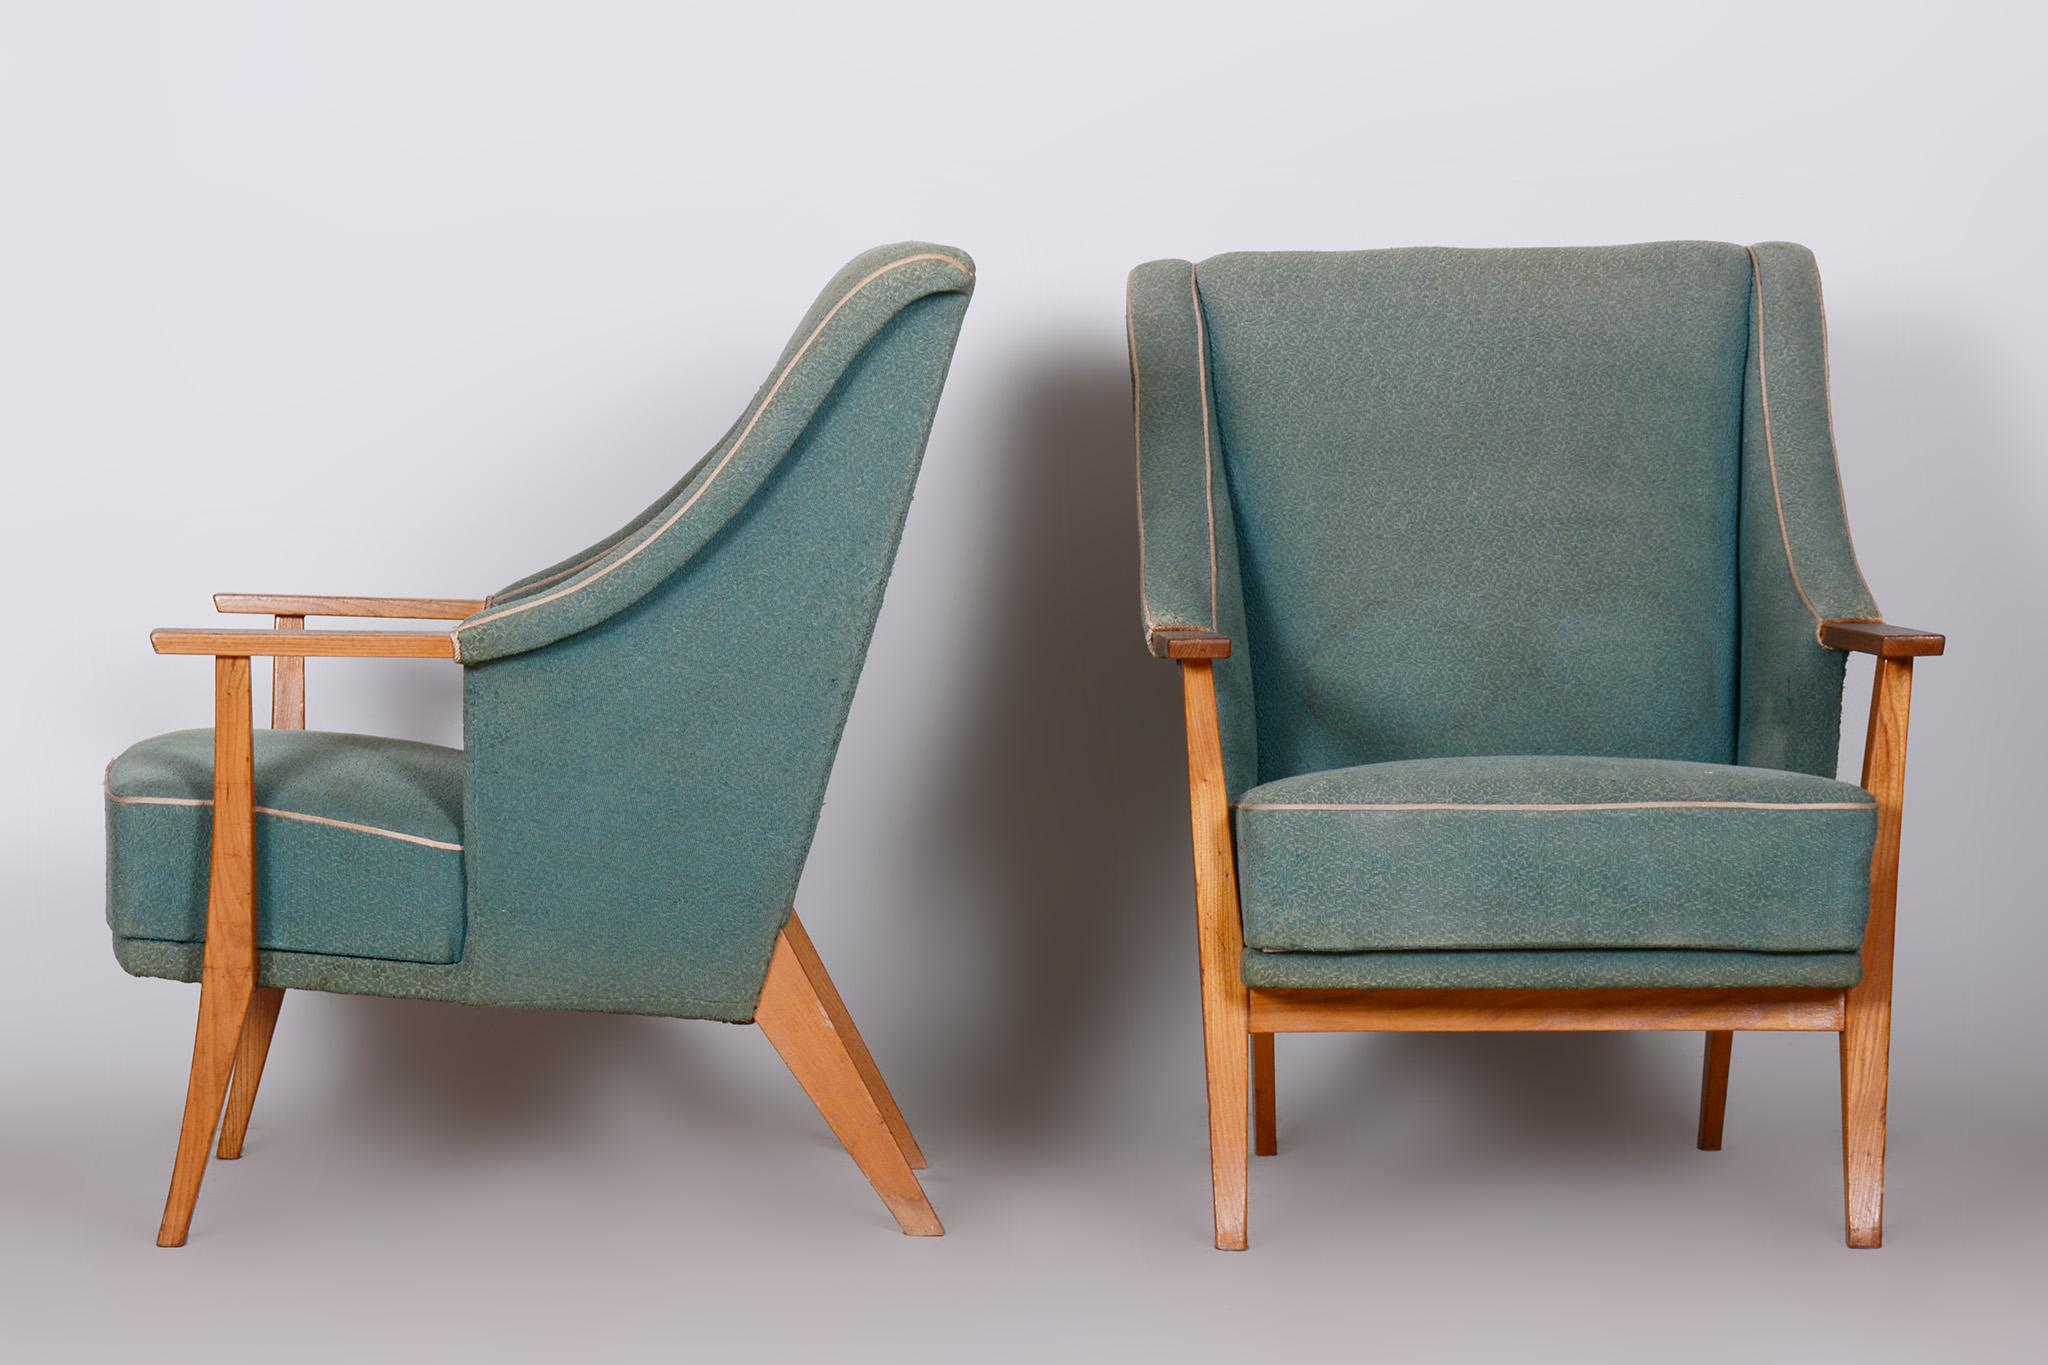 20th Century Pair of Unique Green Beech ArtDeco Armchairs Made in 1940s, Denmark For Sale